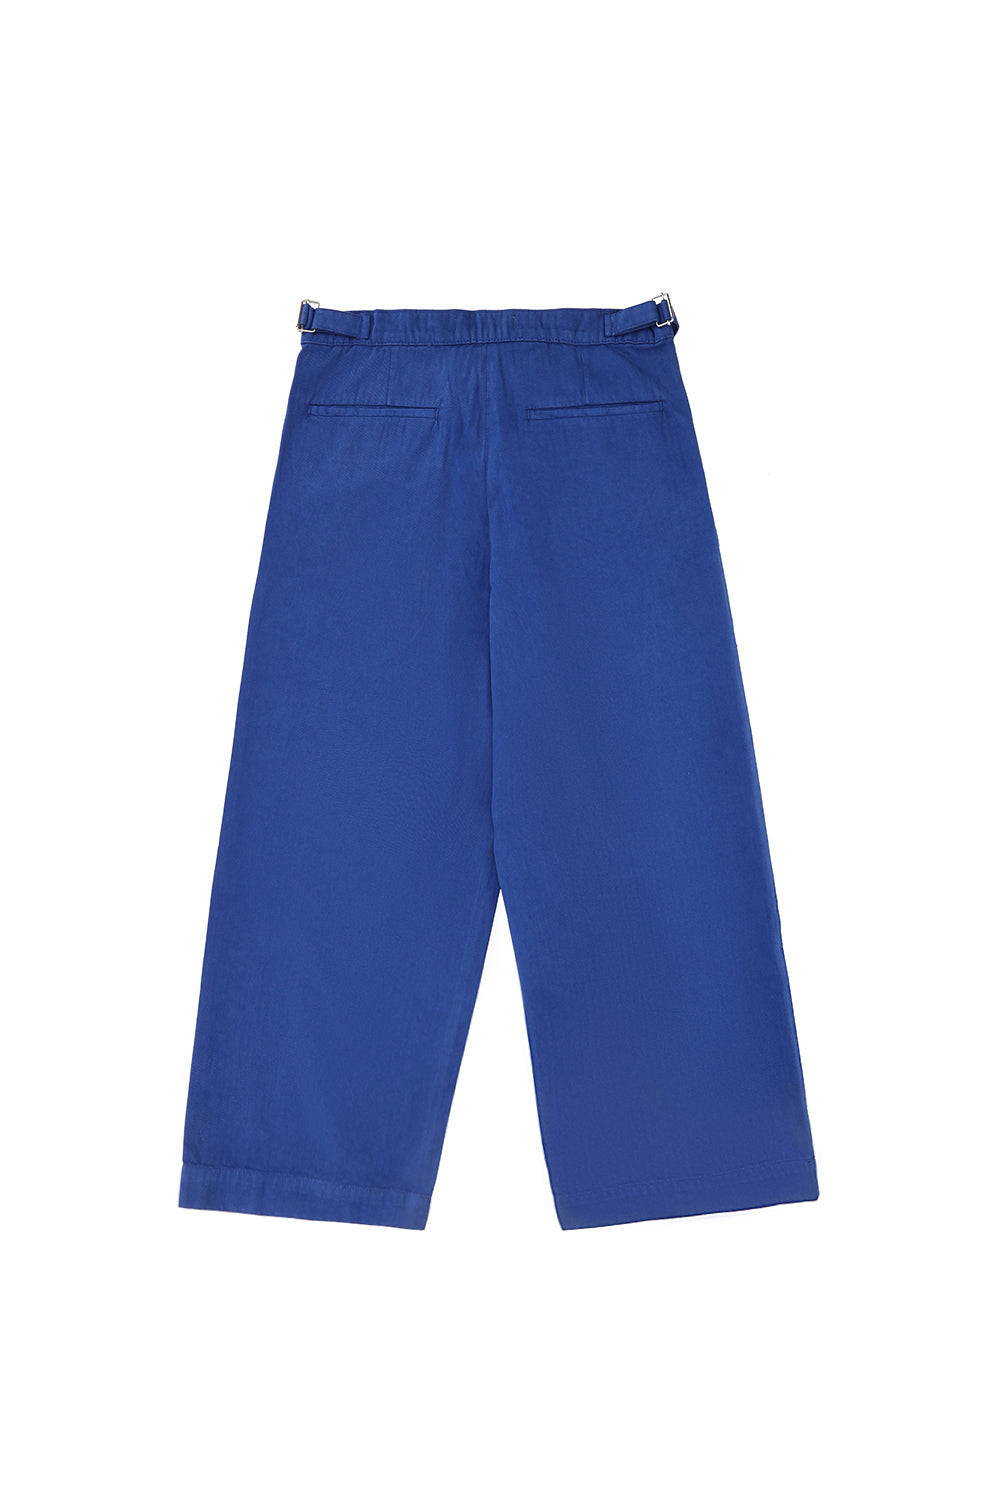 Penelope Pant in Electric Blue